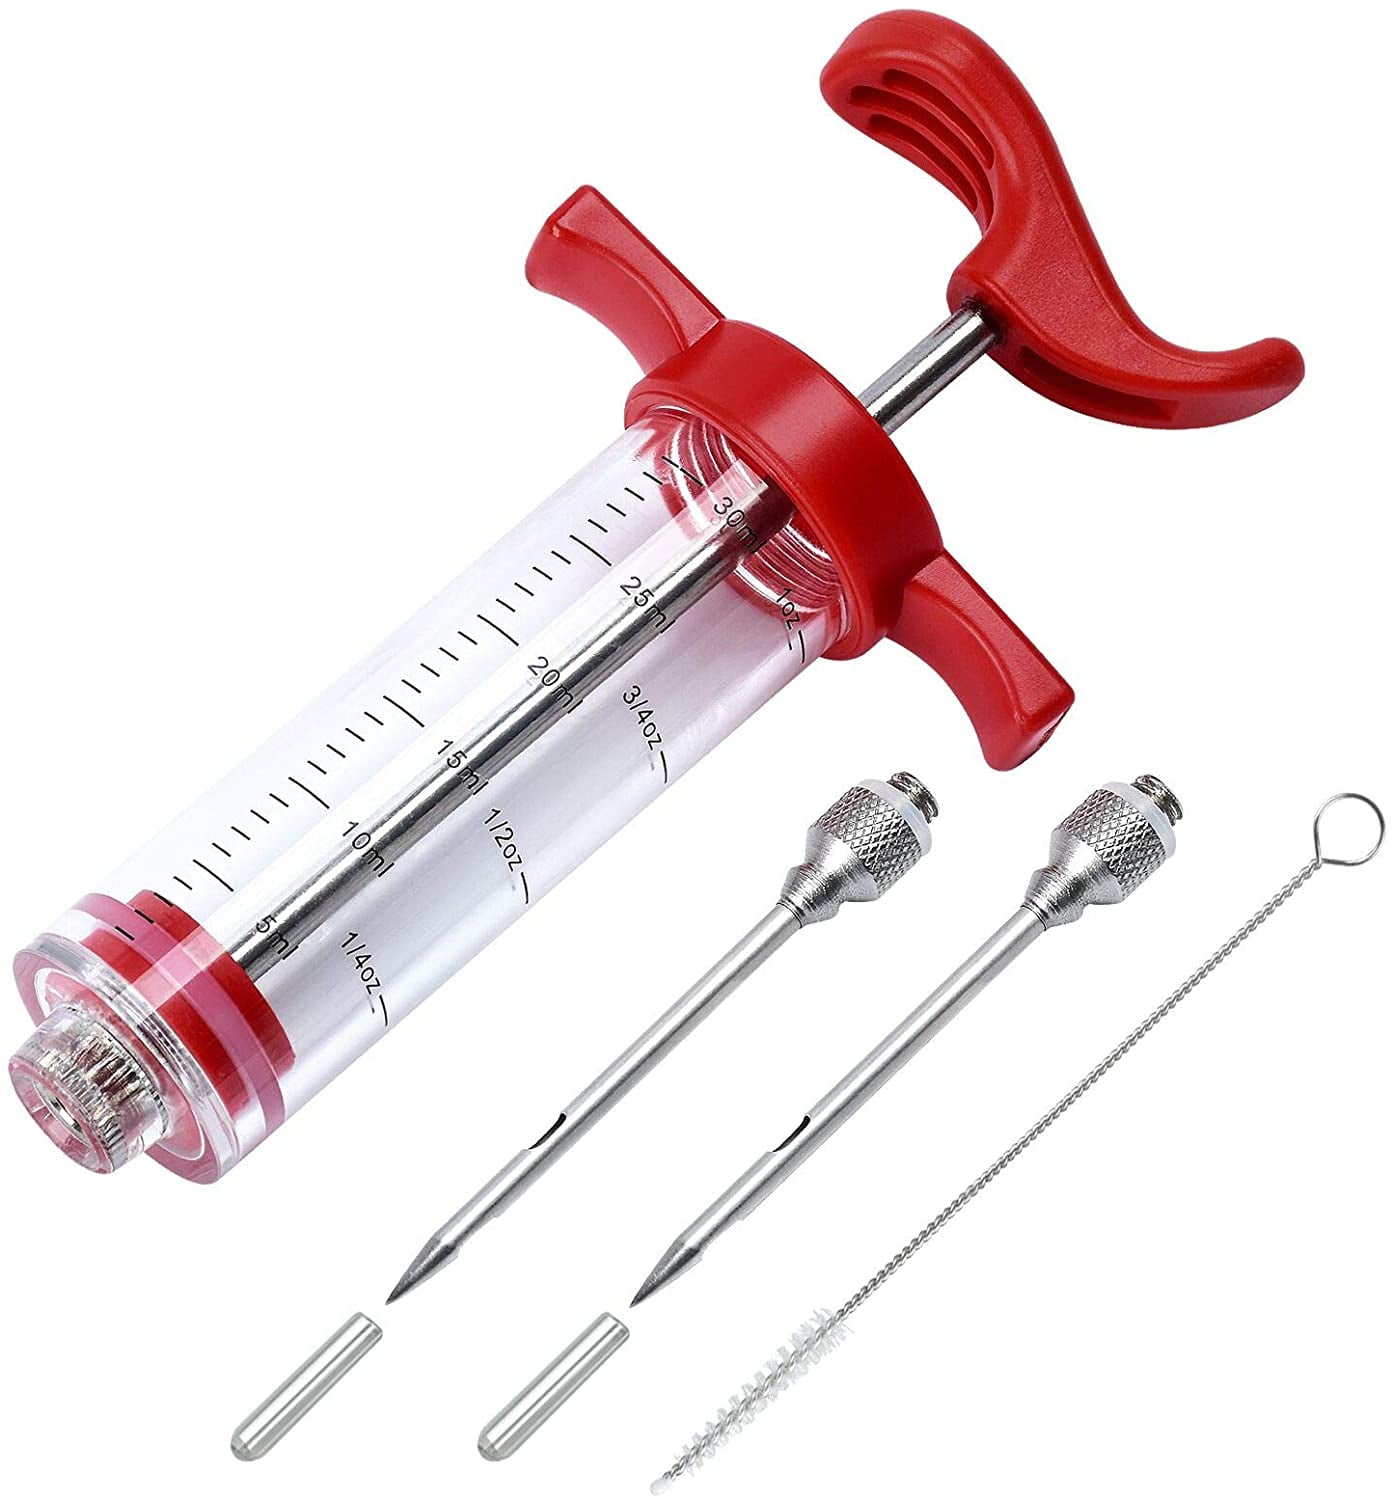 Meat Injector Plastic Marinade Turkey Injector with 1-oz Capacity 2pcs stainless steel needles by DIMESHY 